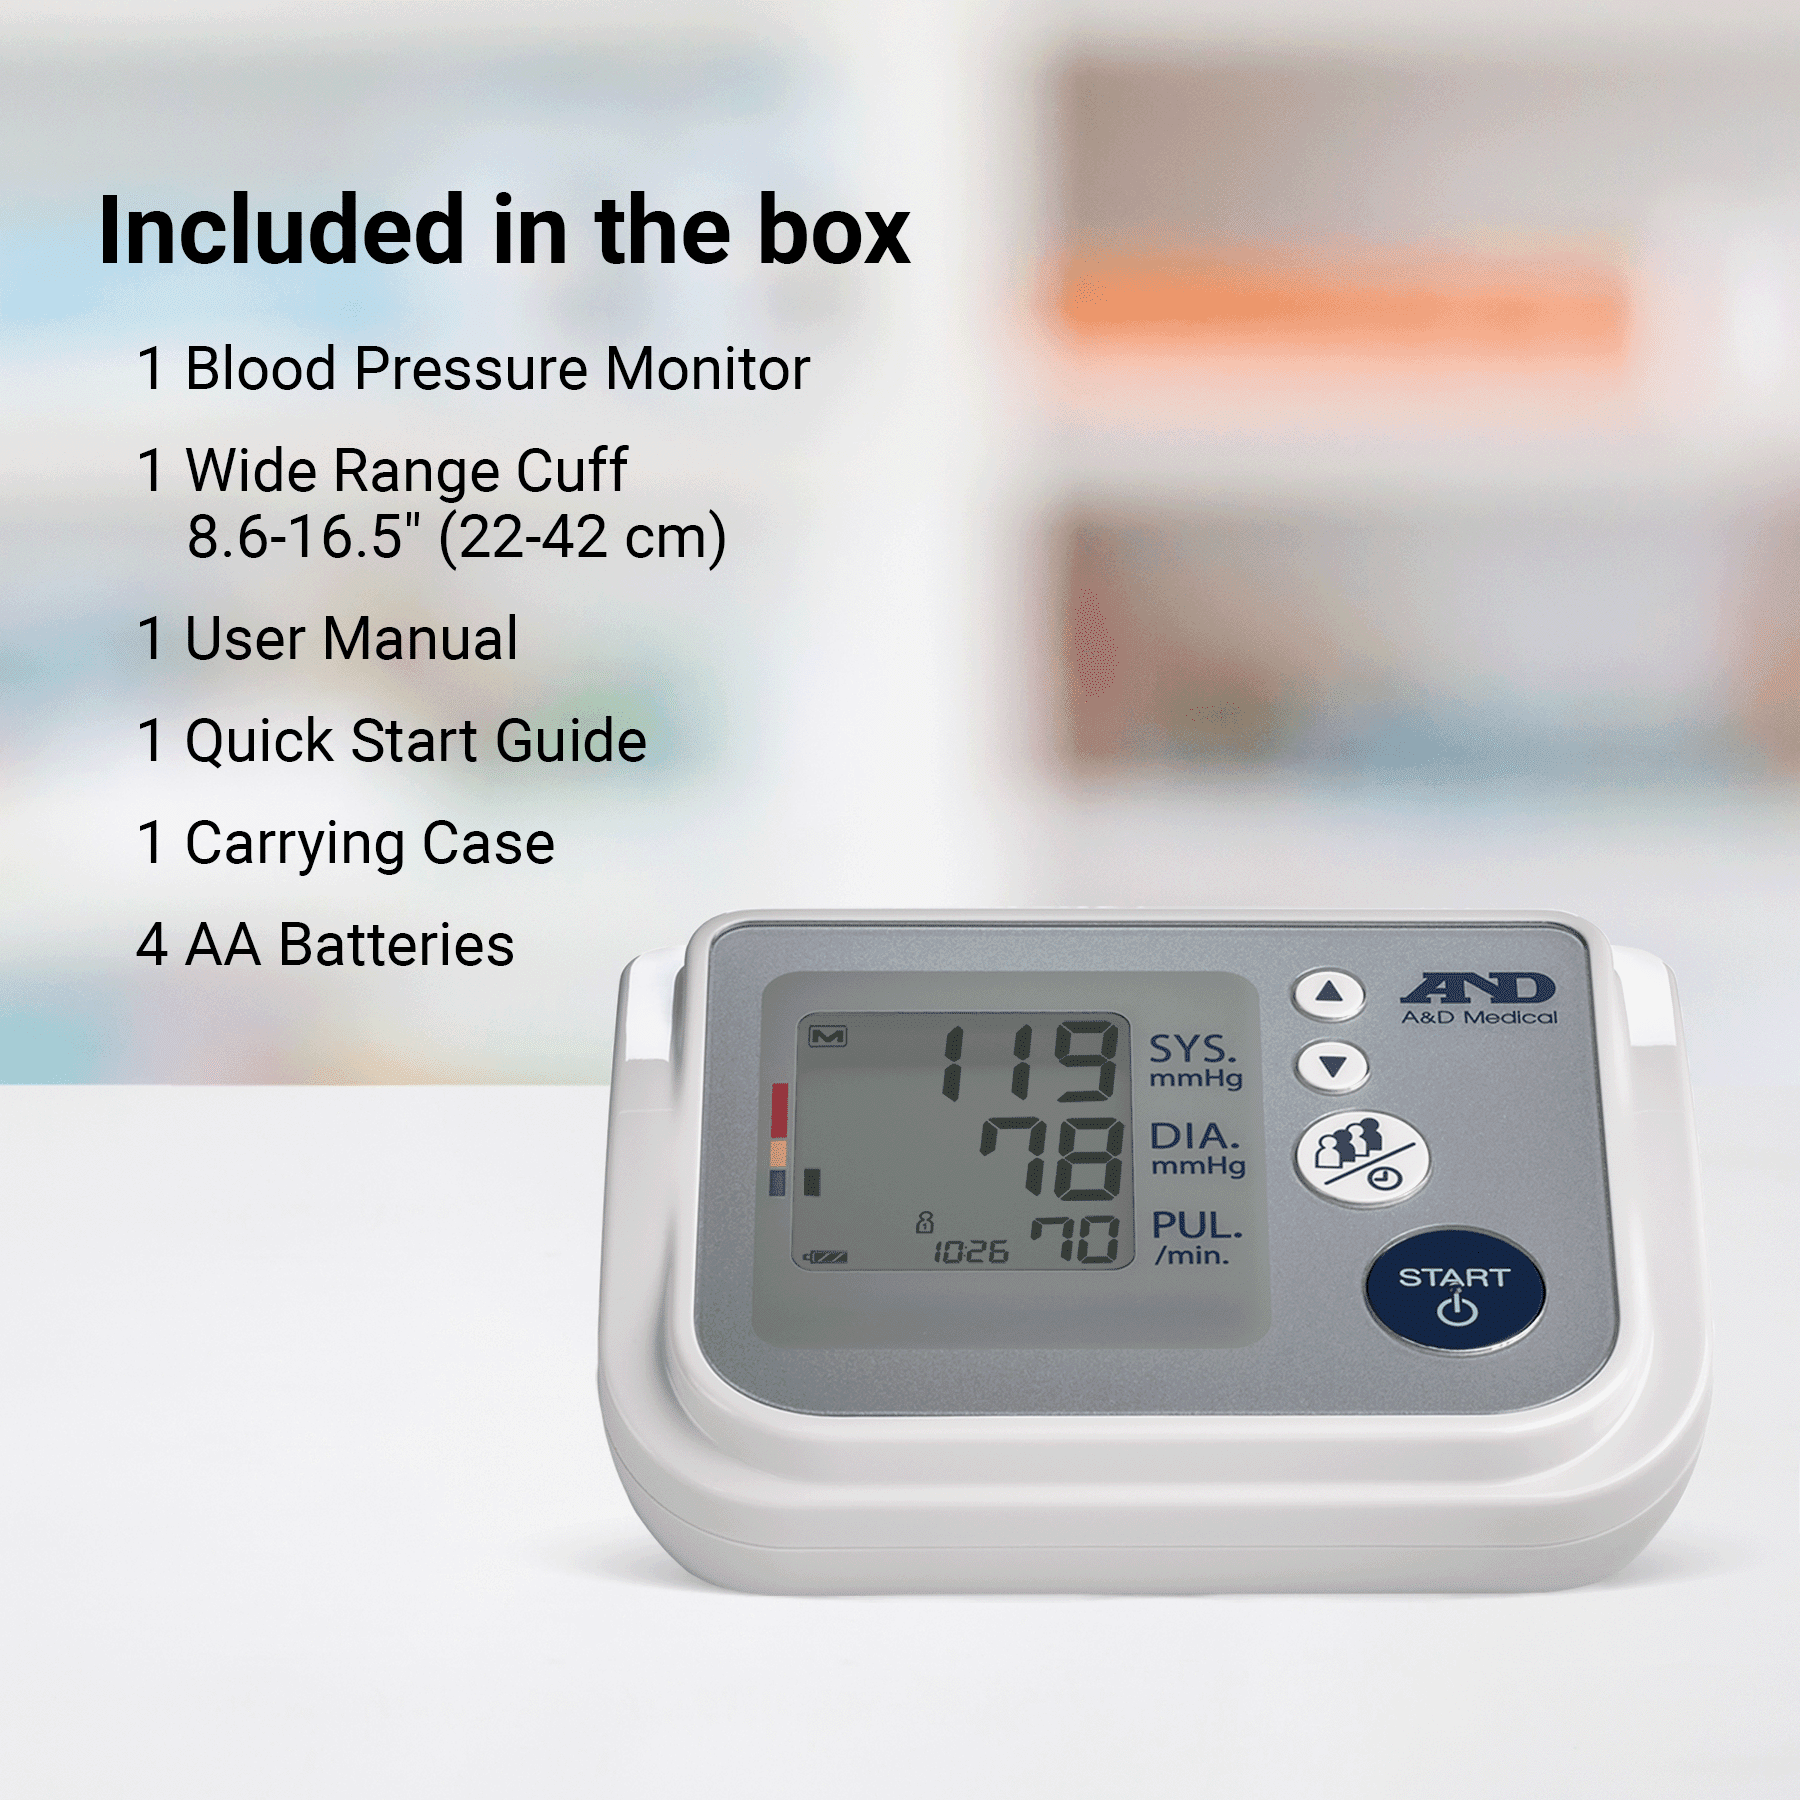 A&D Medical Upper Arm Blood Pressure Monitor with AccuFit Plus Cuff